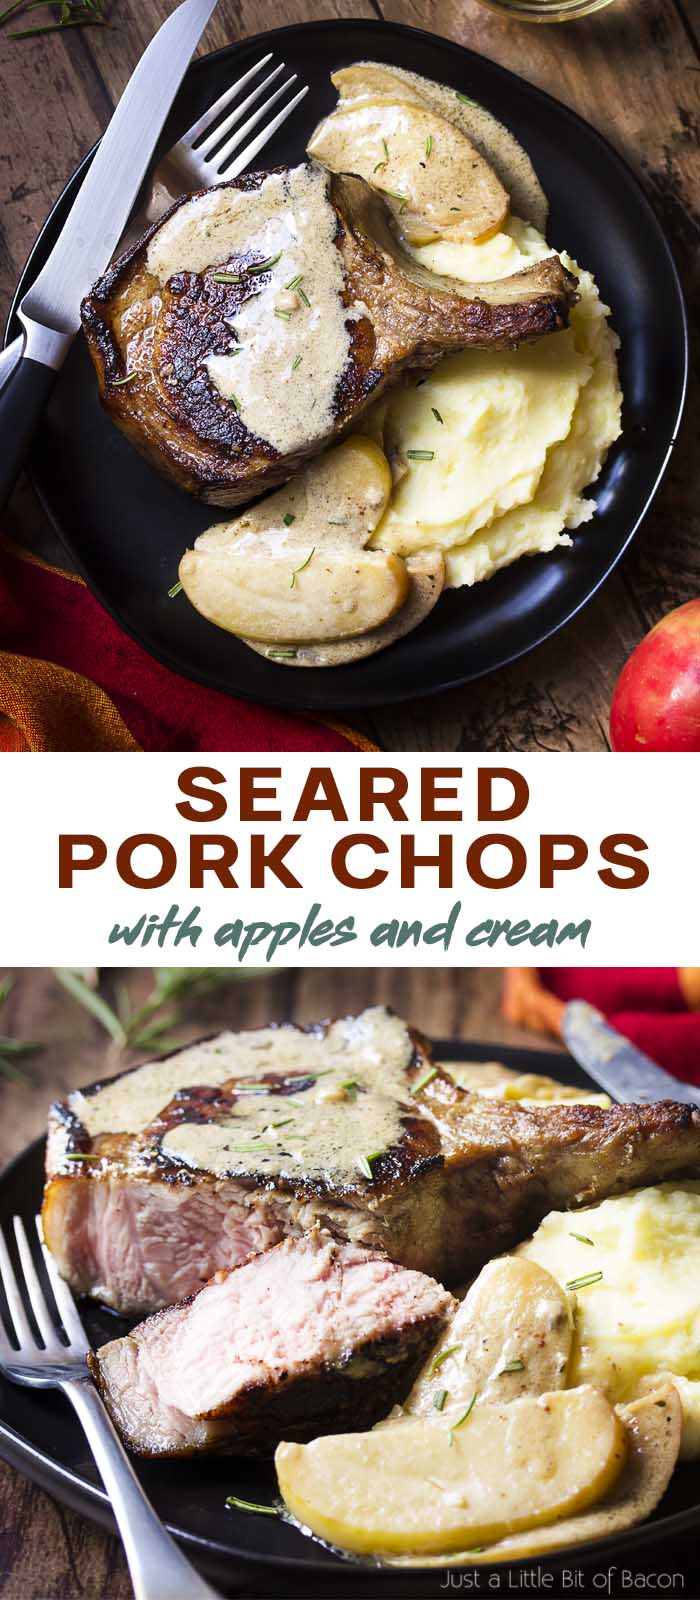 Two views of the recipe on a black plate with text overlay - Seared Pork Chops.